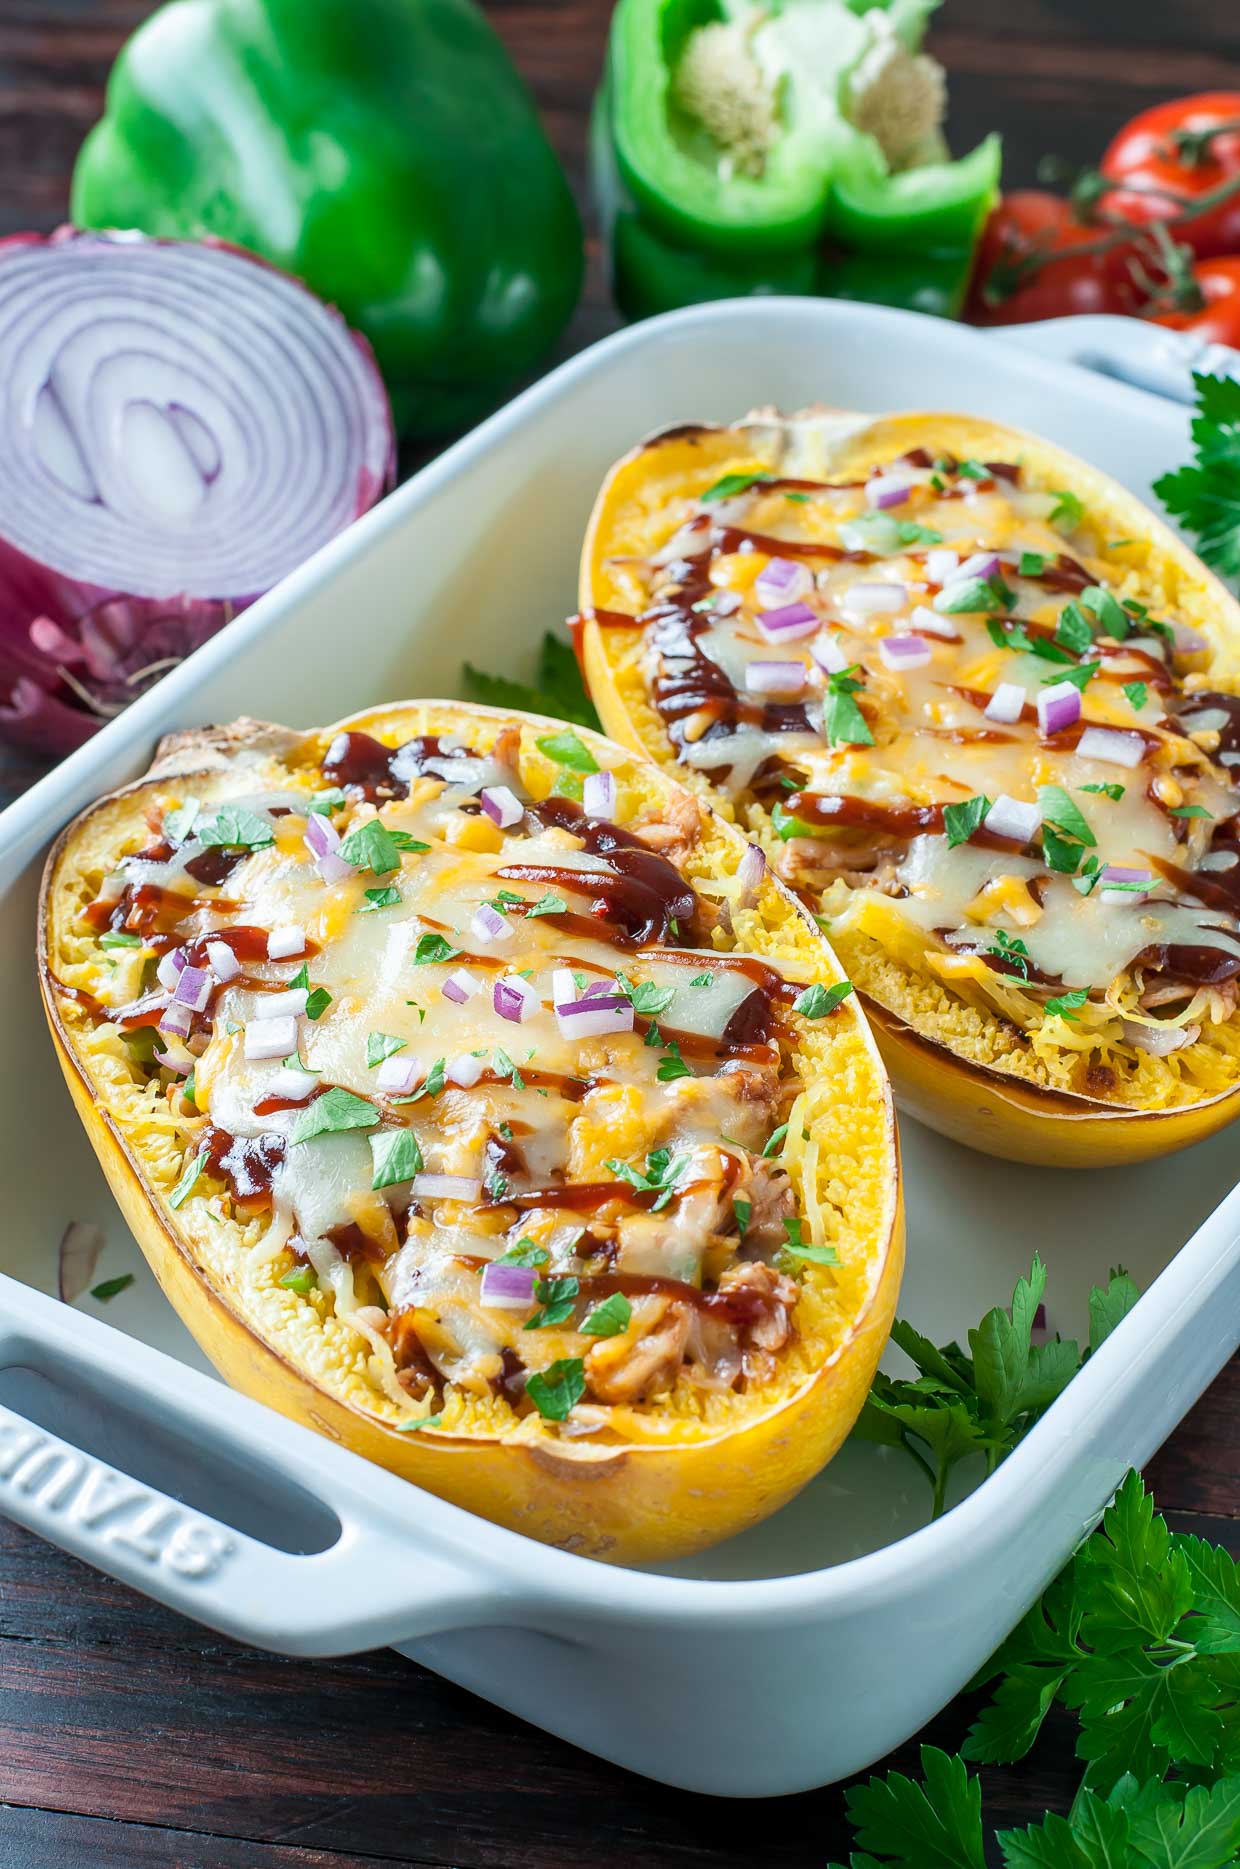 Grab that lone spaghetti squash sitting on your counter and break out the barbecue sauce! These BBQ Chicken Spaghetti Squash make low-carb eating fun and delicious!